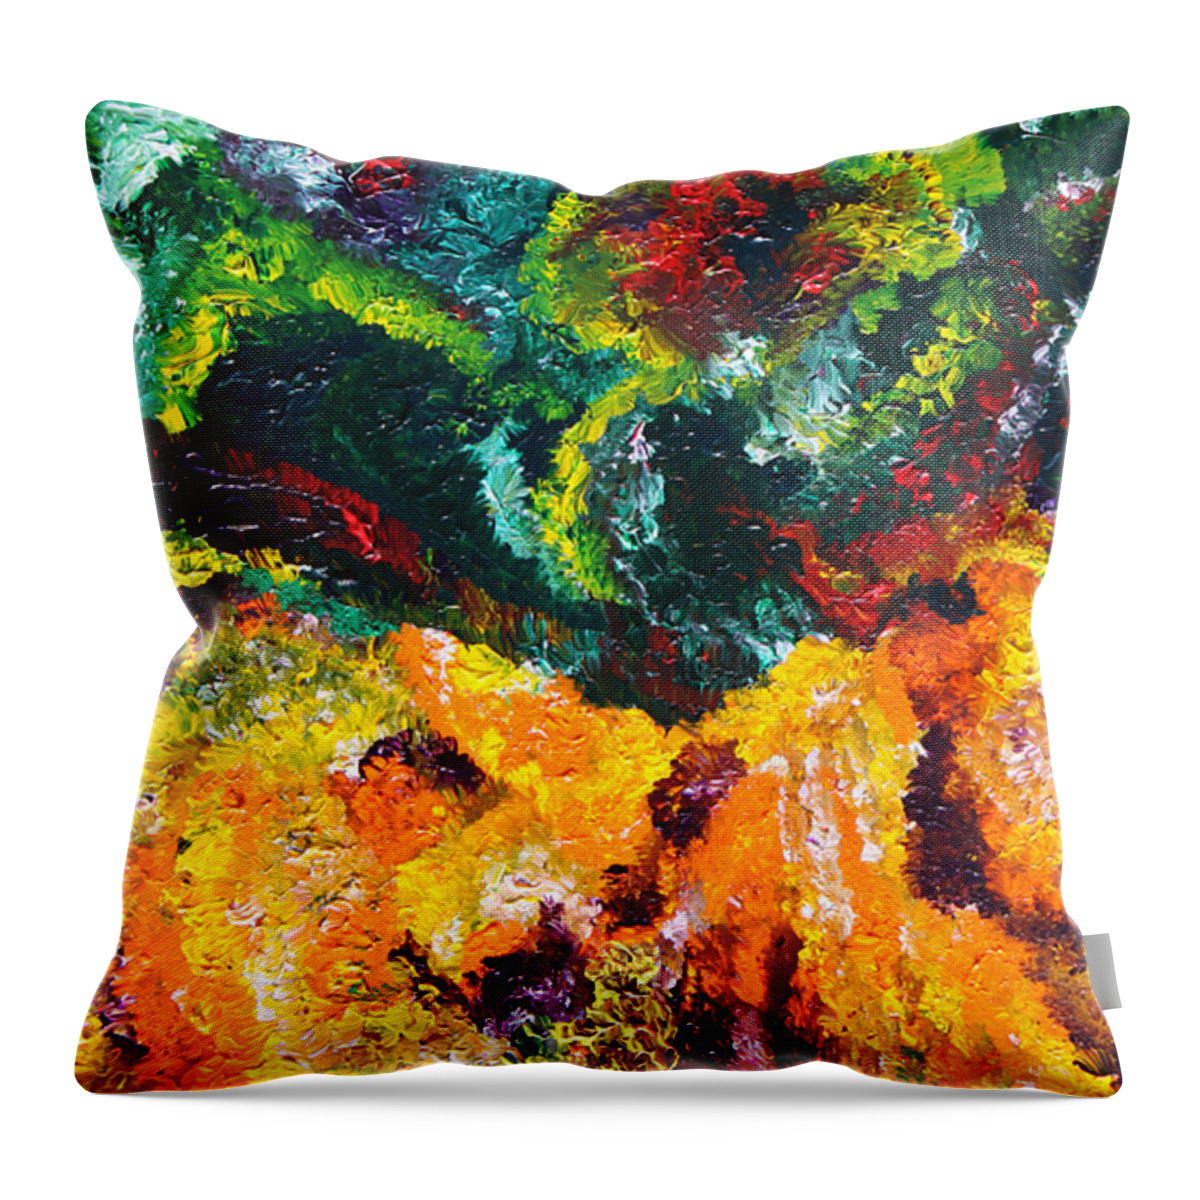 Fusionart Throw Pillow featuring the painting Anemone by Ralph White